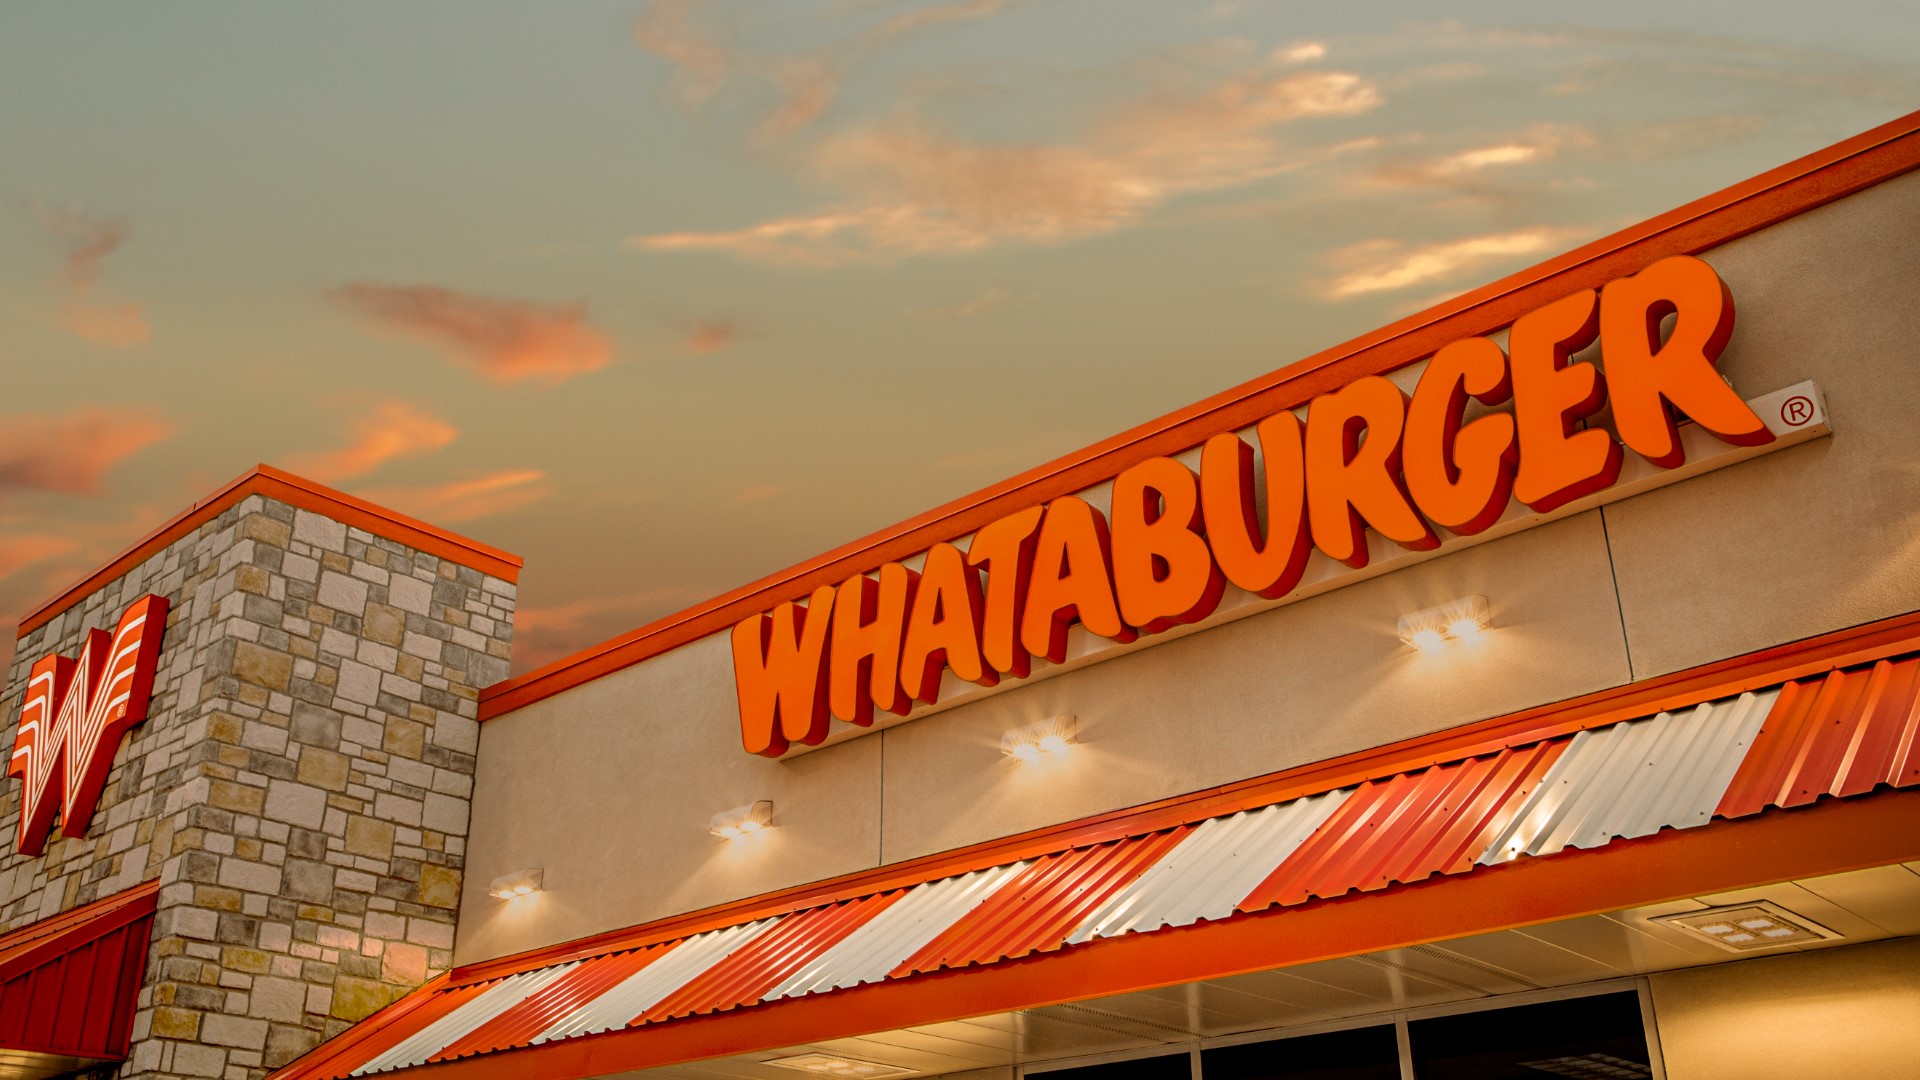 Whataburger opened its first restaurant in decades in Colorado on Wednesday, Feb. 23, 2022 in Colorado Springs.